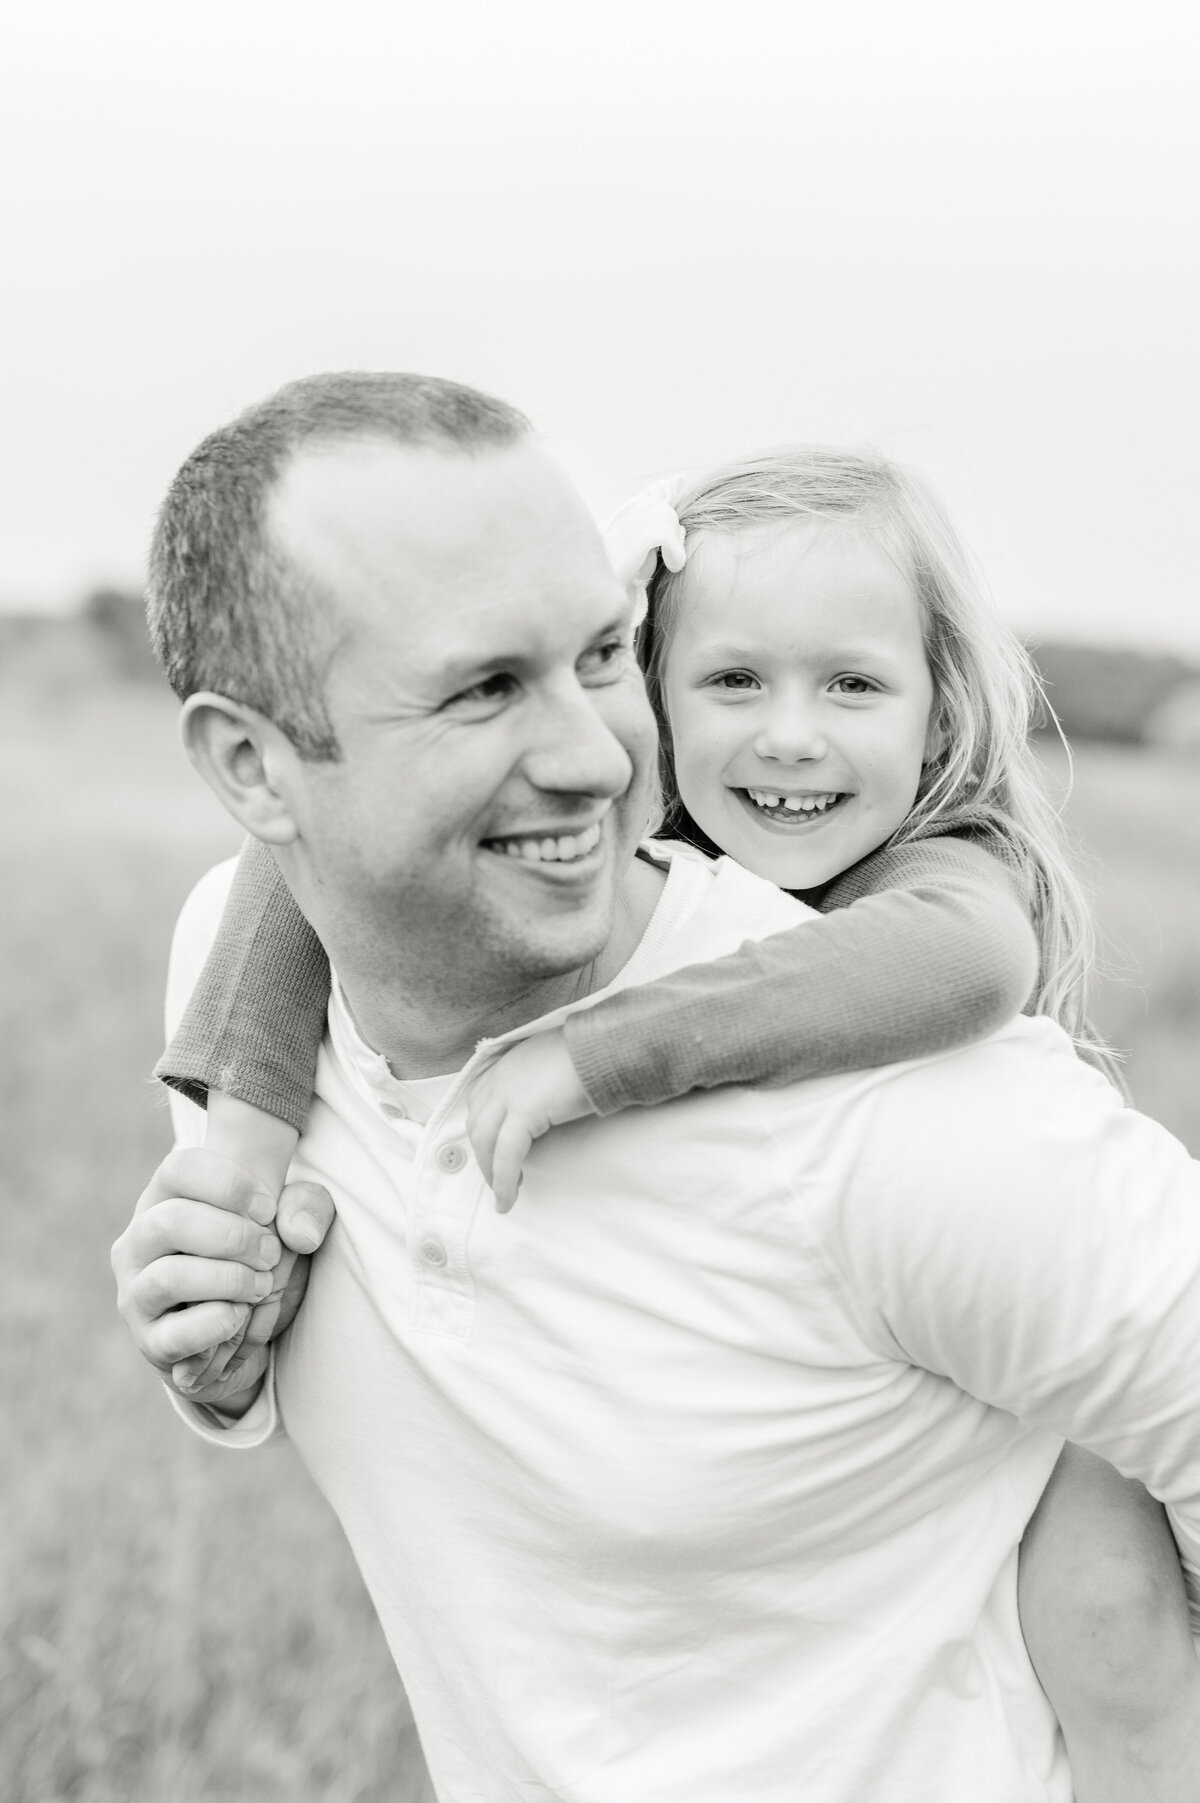 Black and white image of a dad giving his daughter a piggy back ride while smiling back toward her